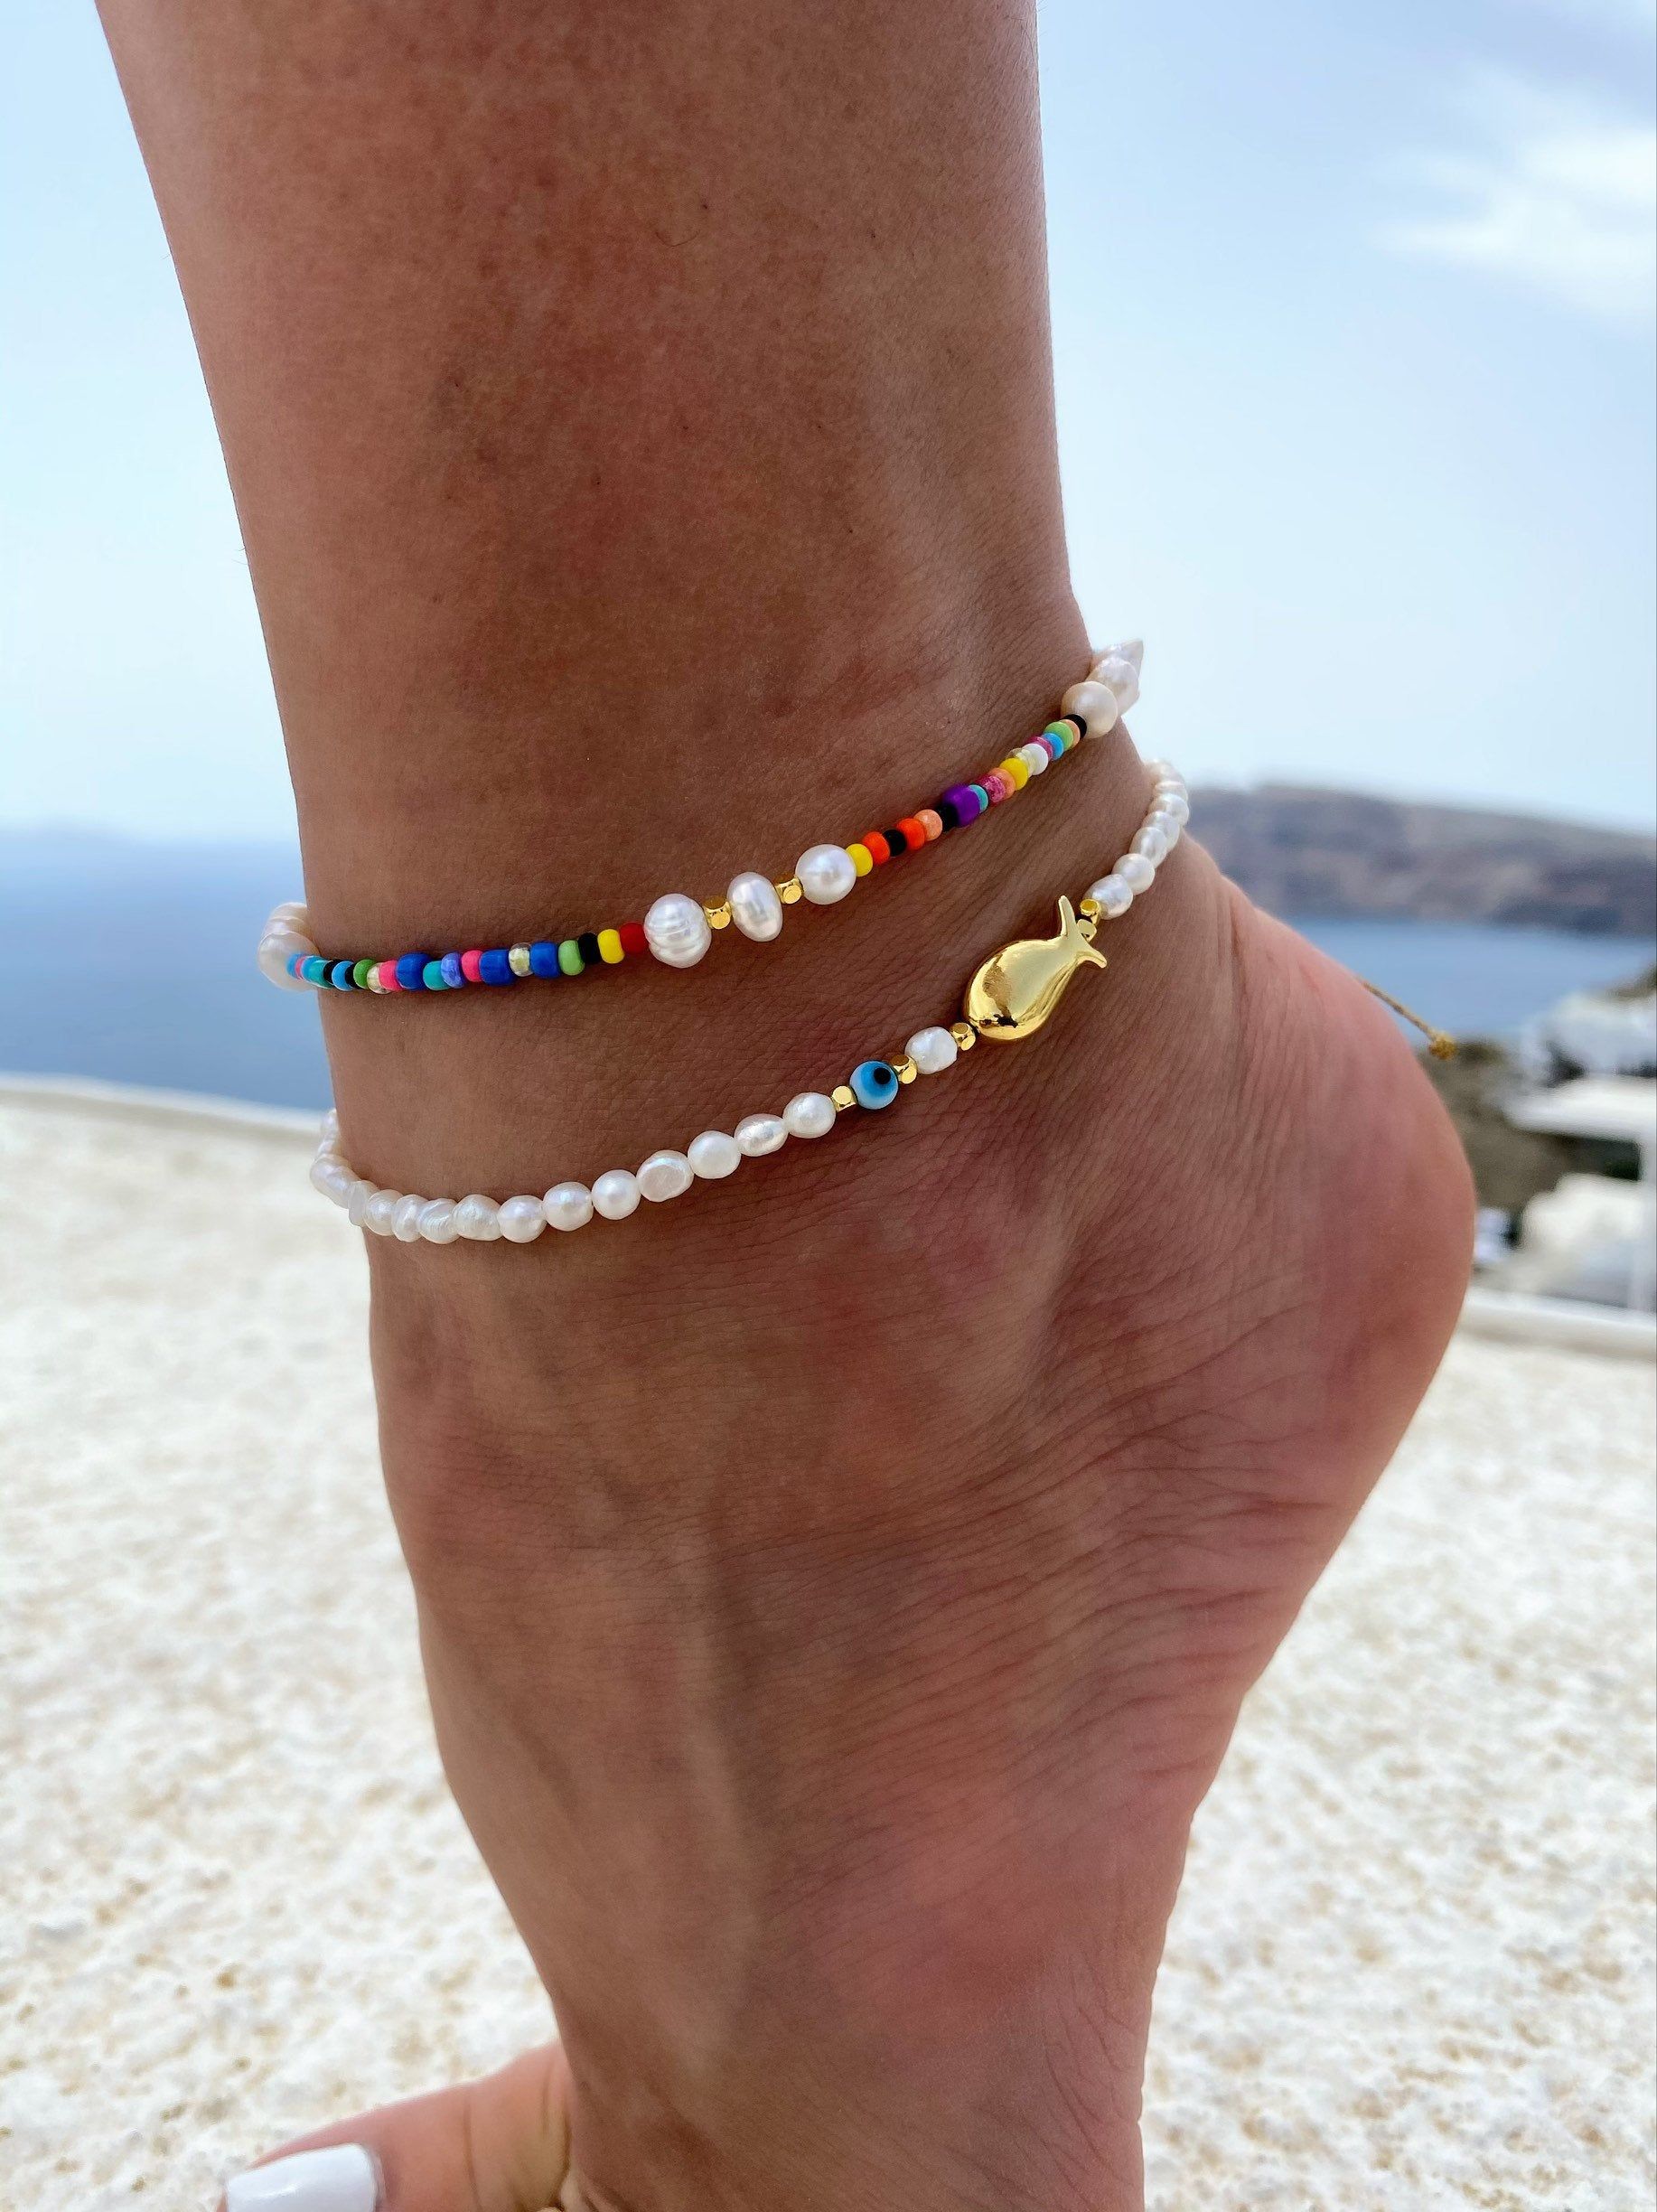 Redefine your beauty with the best ankle bracelets